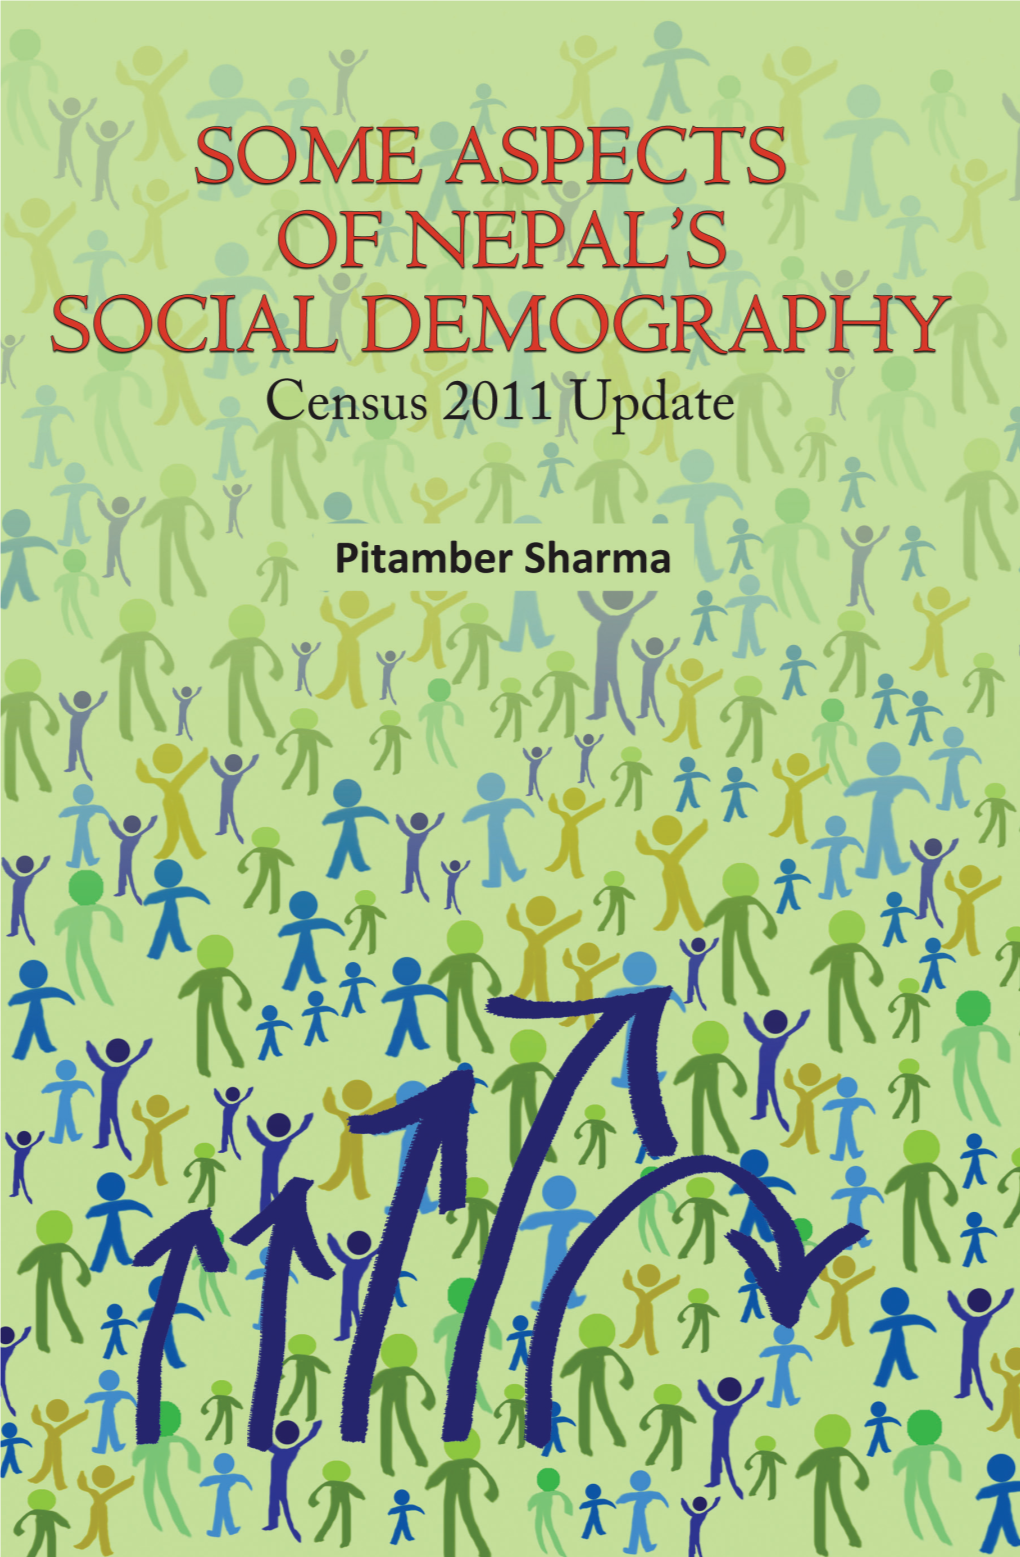 Some Aspects of Nepal's Social Demography